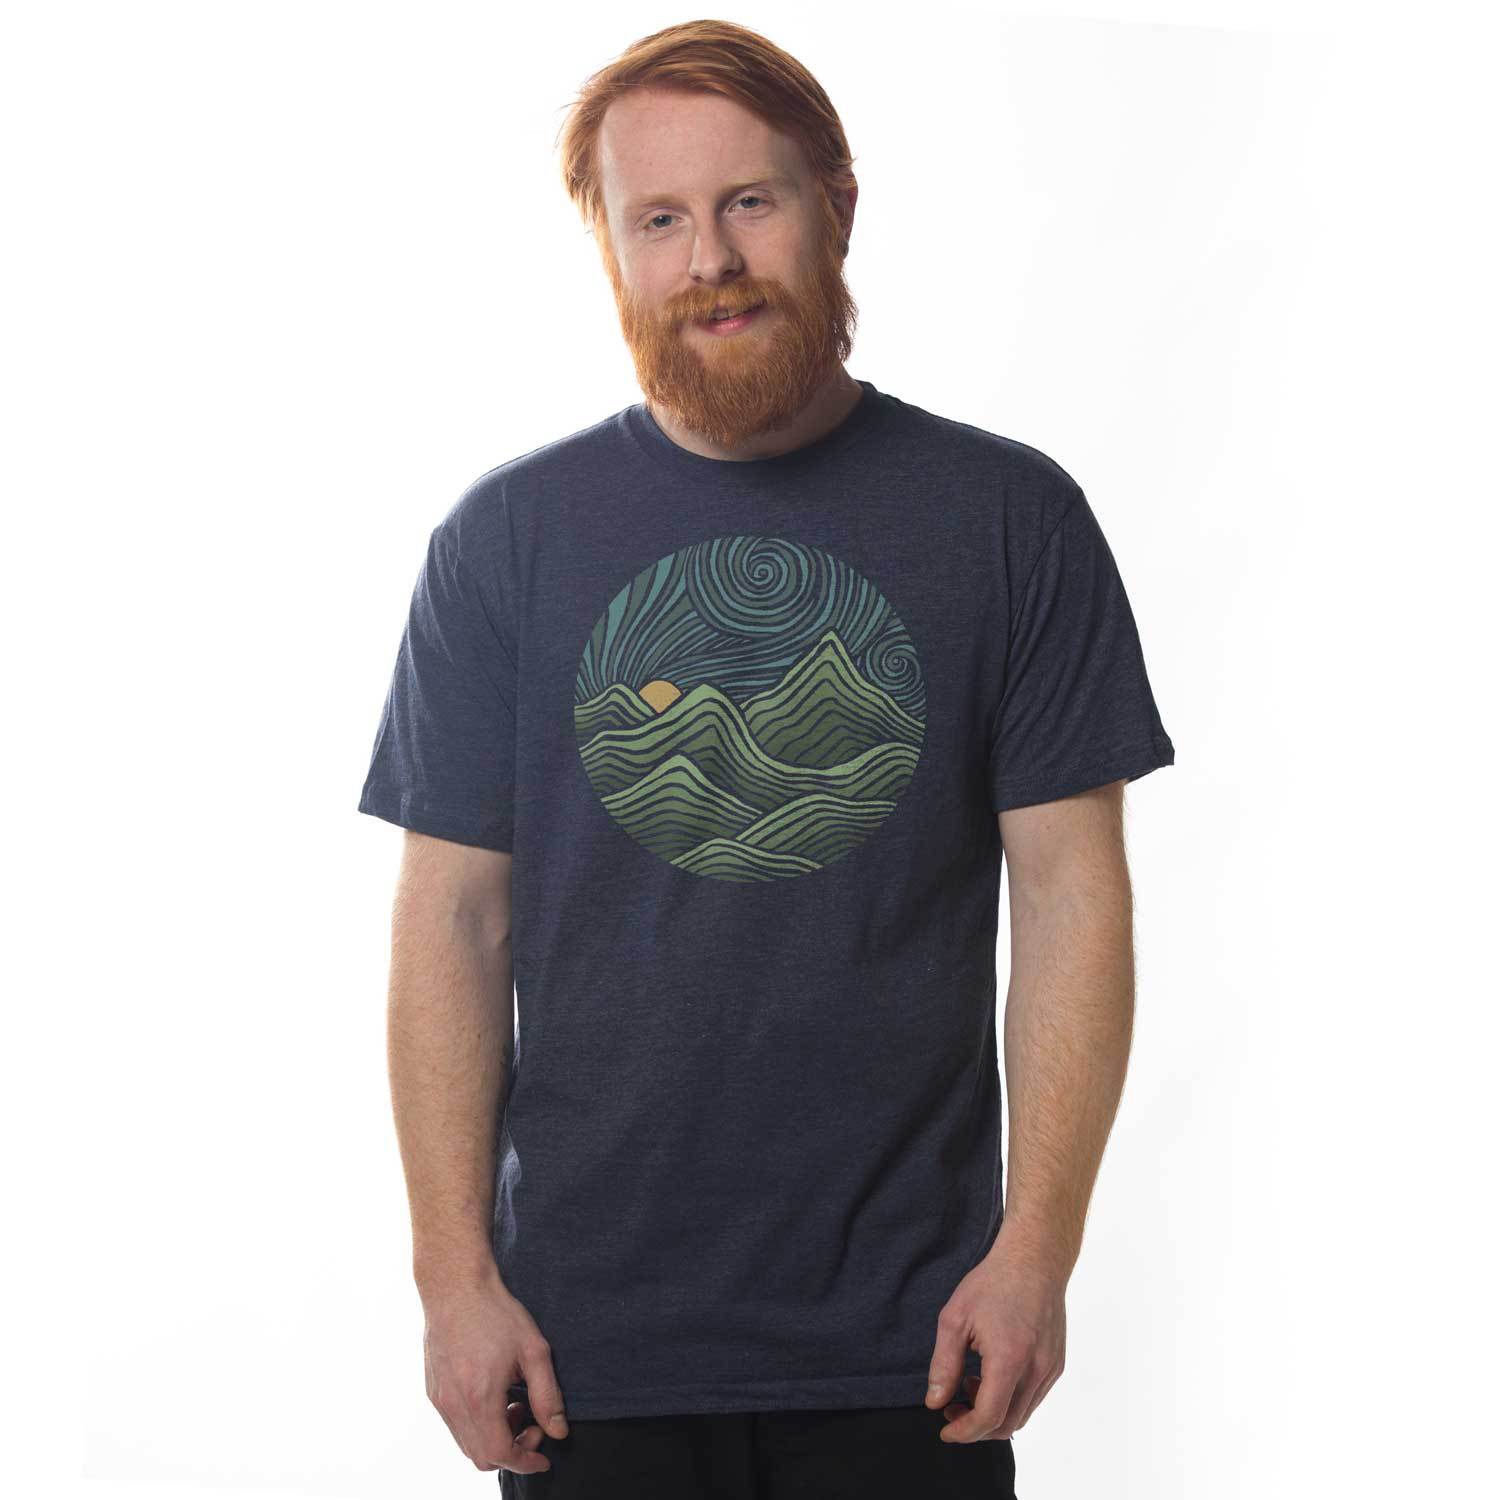 Swirly Mountains Cool Hippie Graphic Tee | Vintage Nature T-Shirt Navy / 3XL